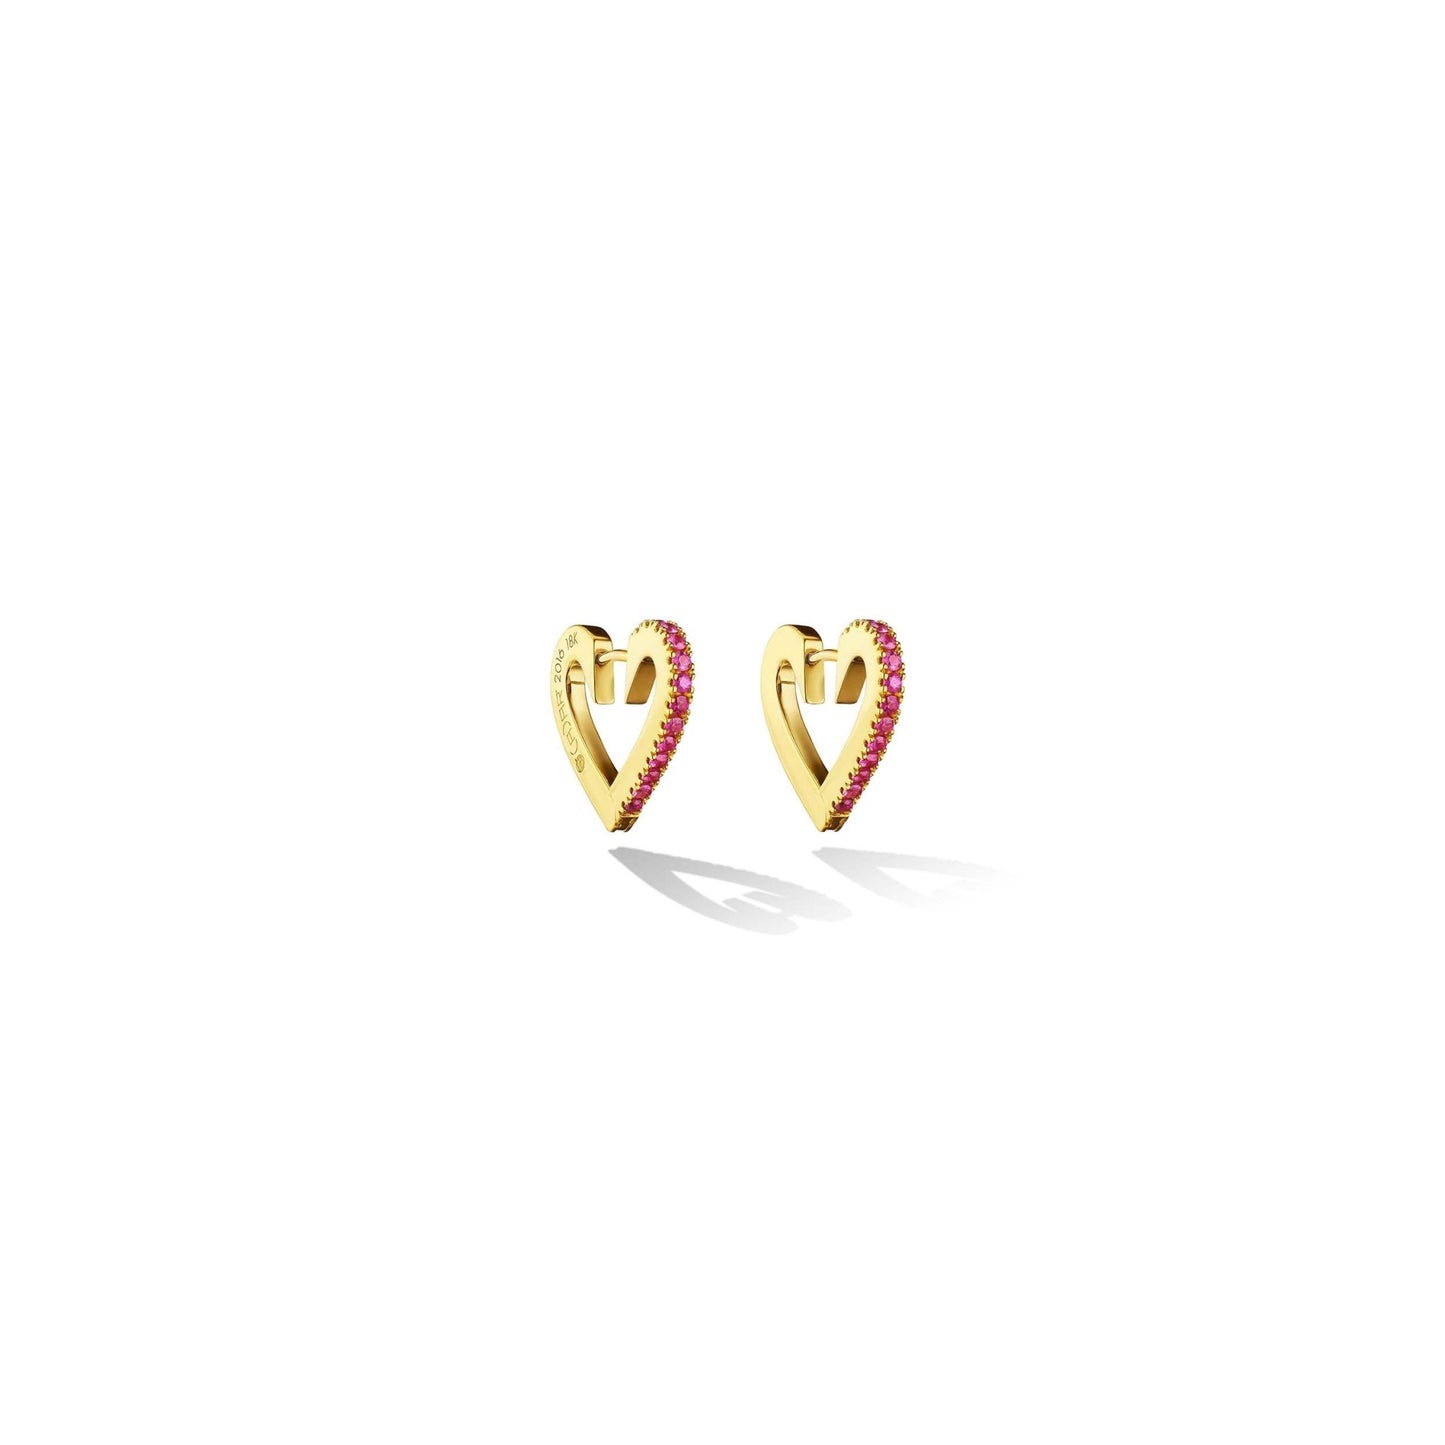 Small Yellow Gold Endless Hoop Earrings with Rubies - Cadar